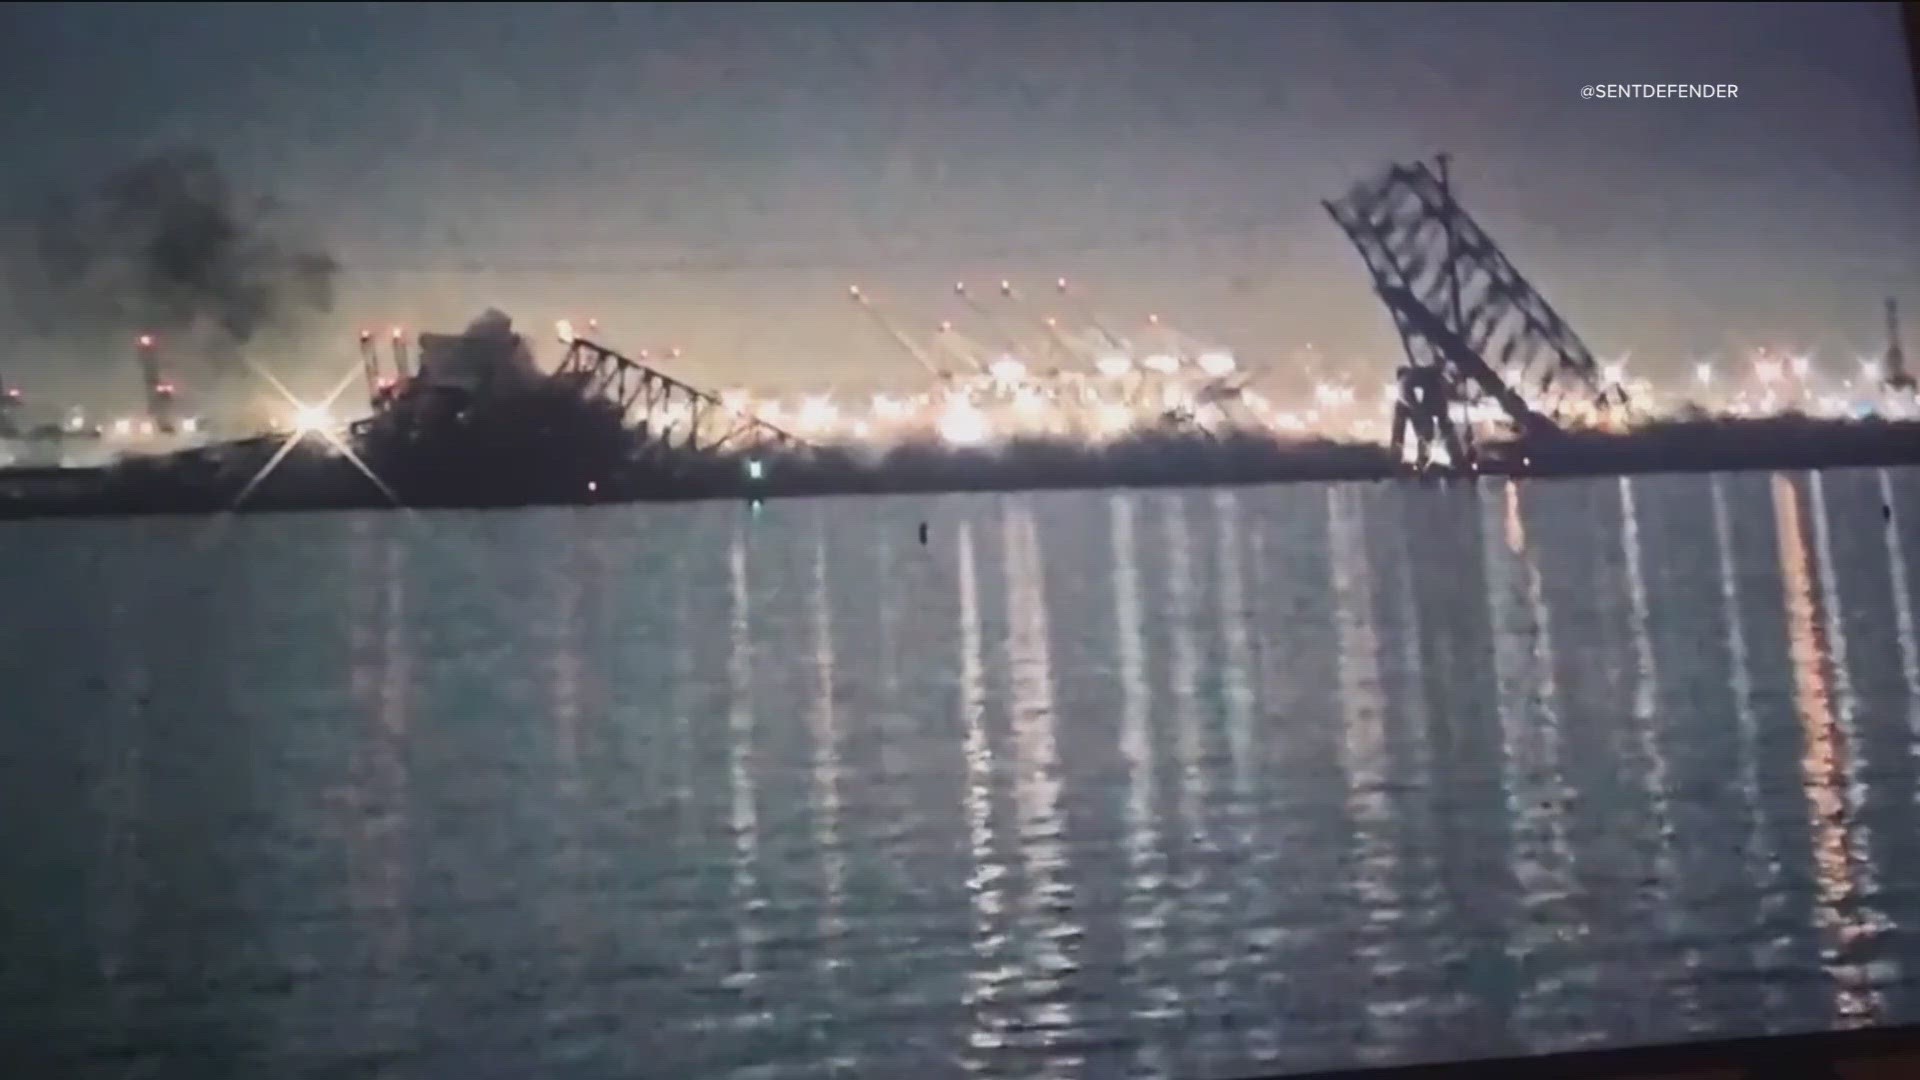 A container ship rammed into a major bridge in Baltimore early Tuesday, causing it to snap in several places and plunge into the river below.